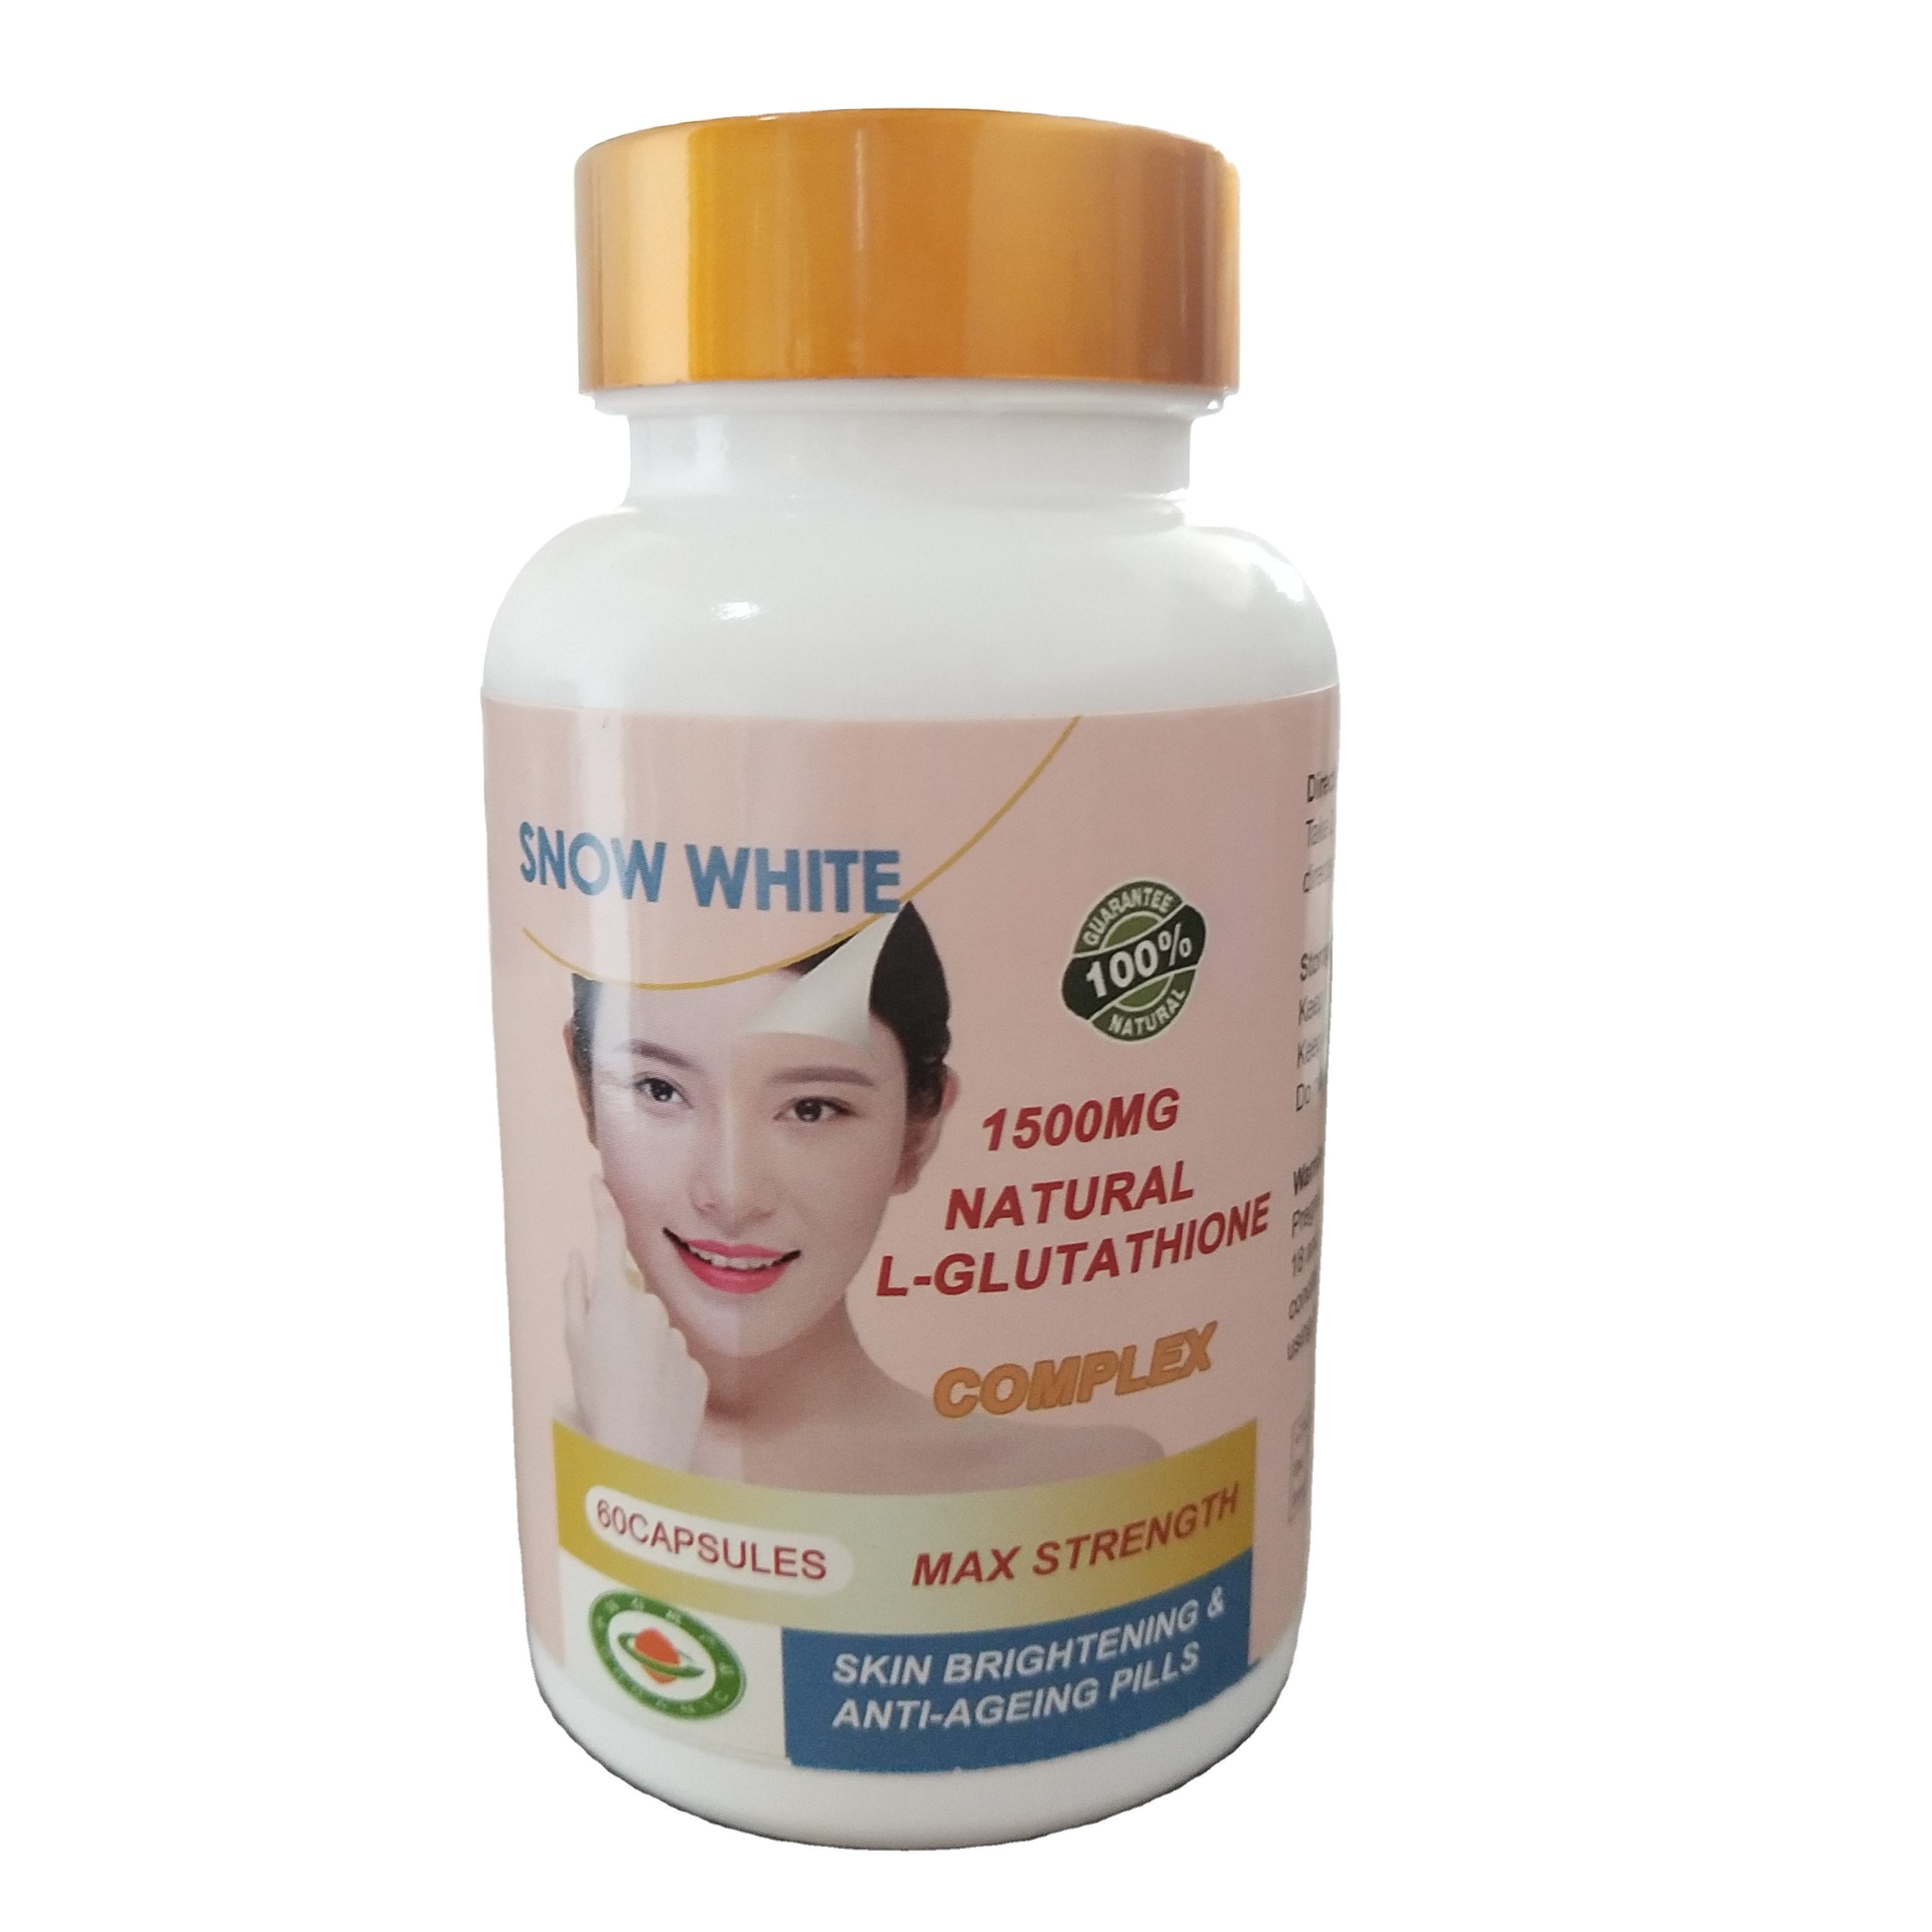 Snow White Natural Glutathione Skin BRIGHTENING and ANTI AGING PILLS , 60 CAPS